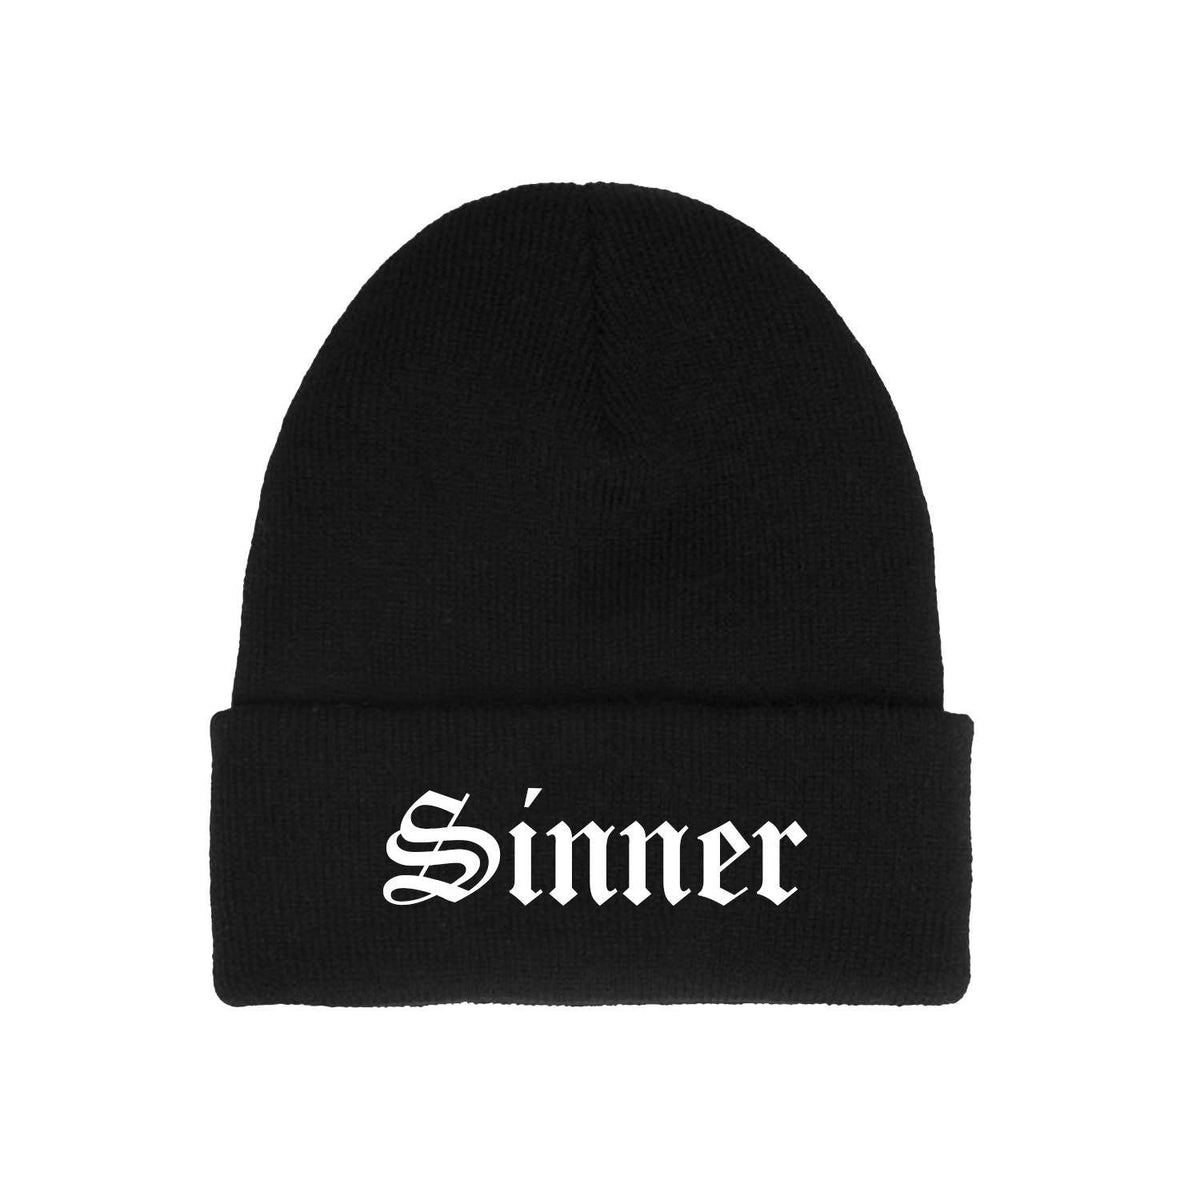 Sinner Old English Beanie - Yours Truly Clothing